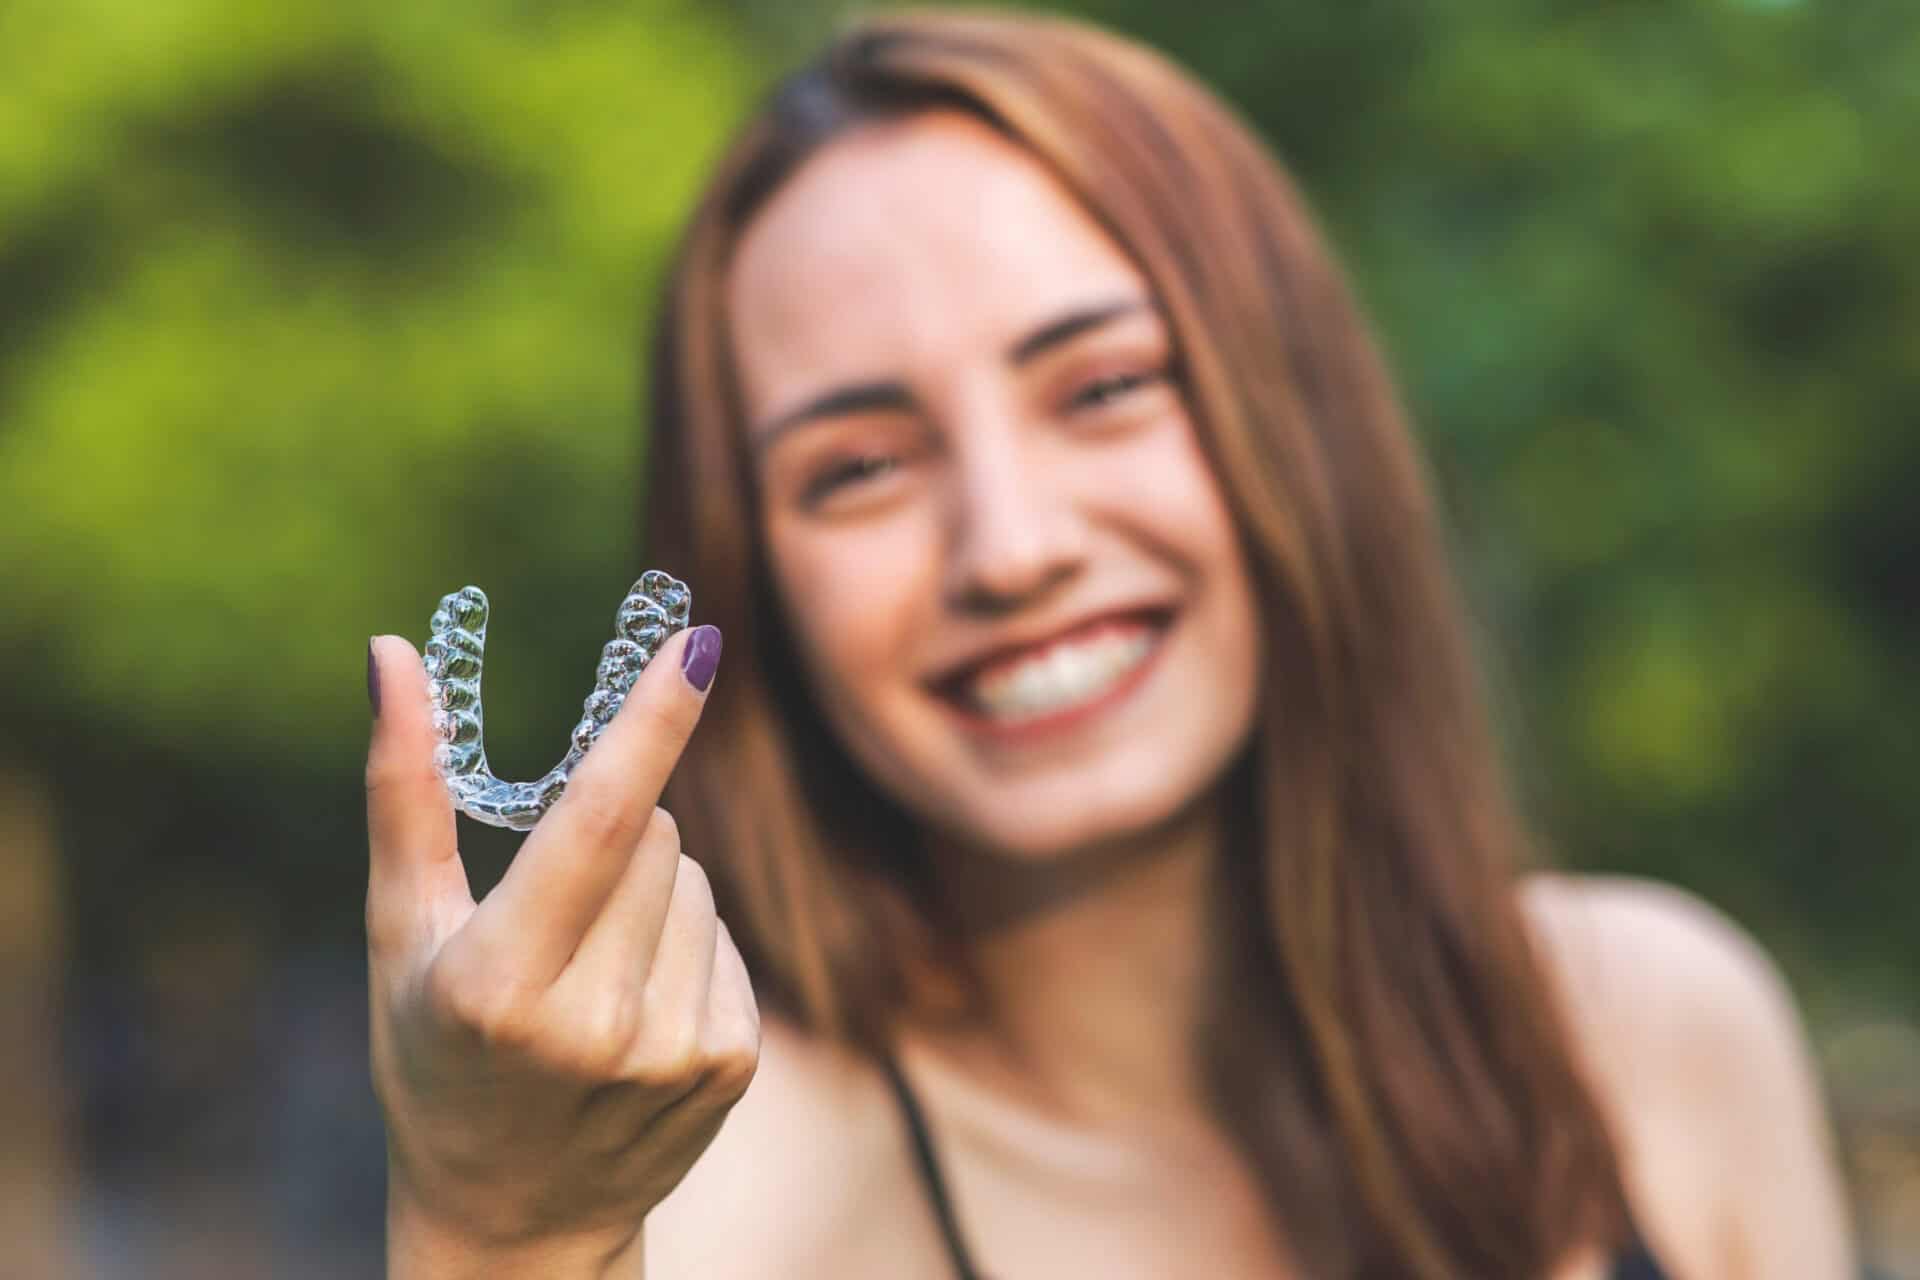 Young woman holding an invisalign brace